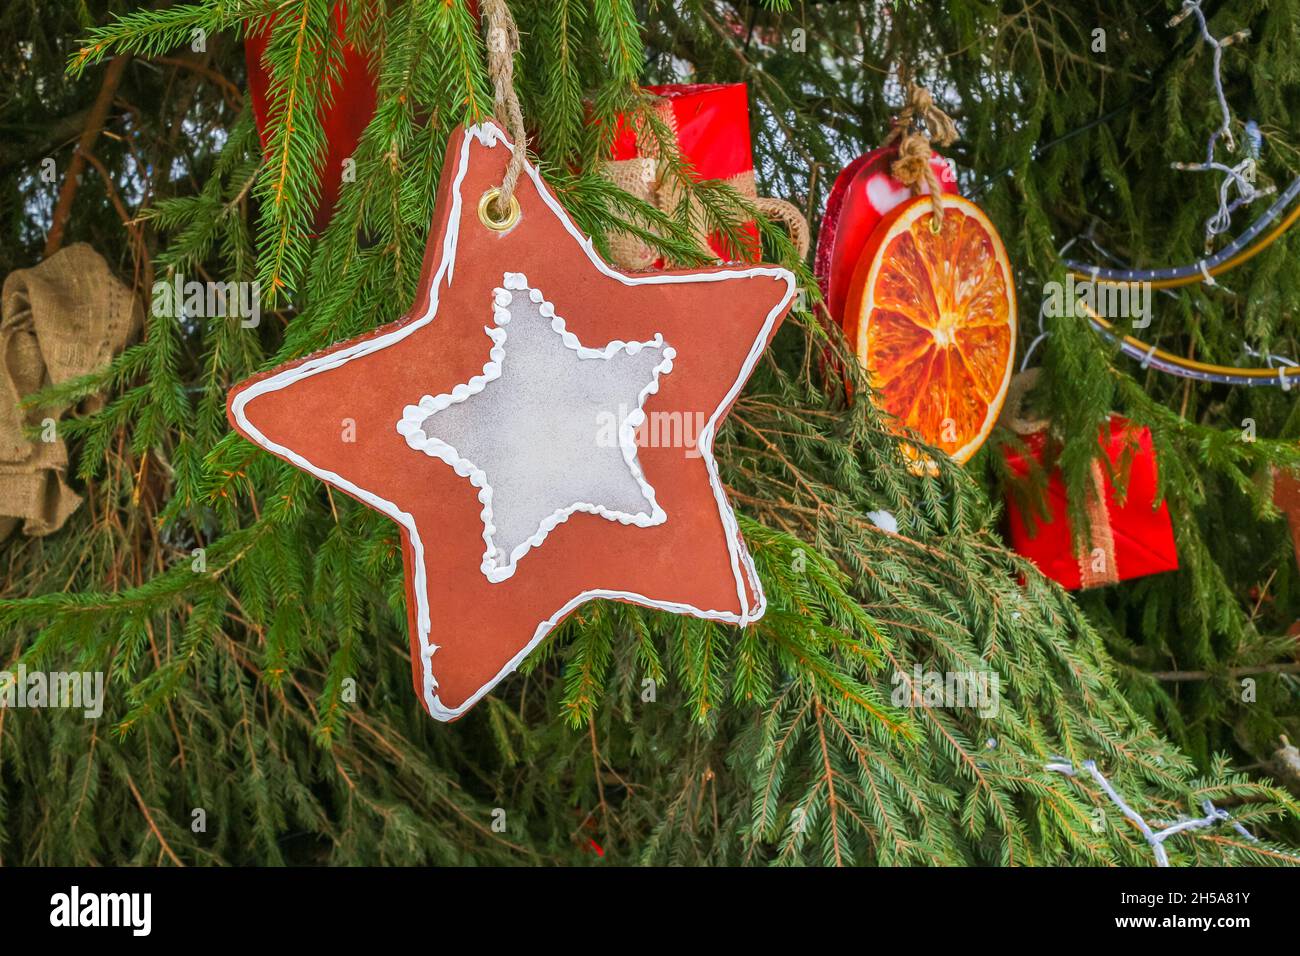 Red glass star, bedded in an angel hair nest, a Christmas